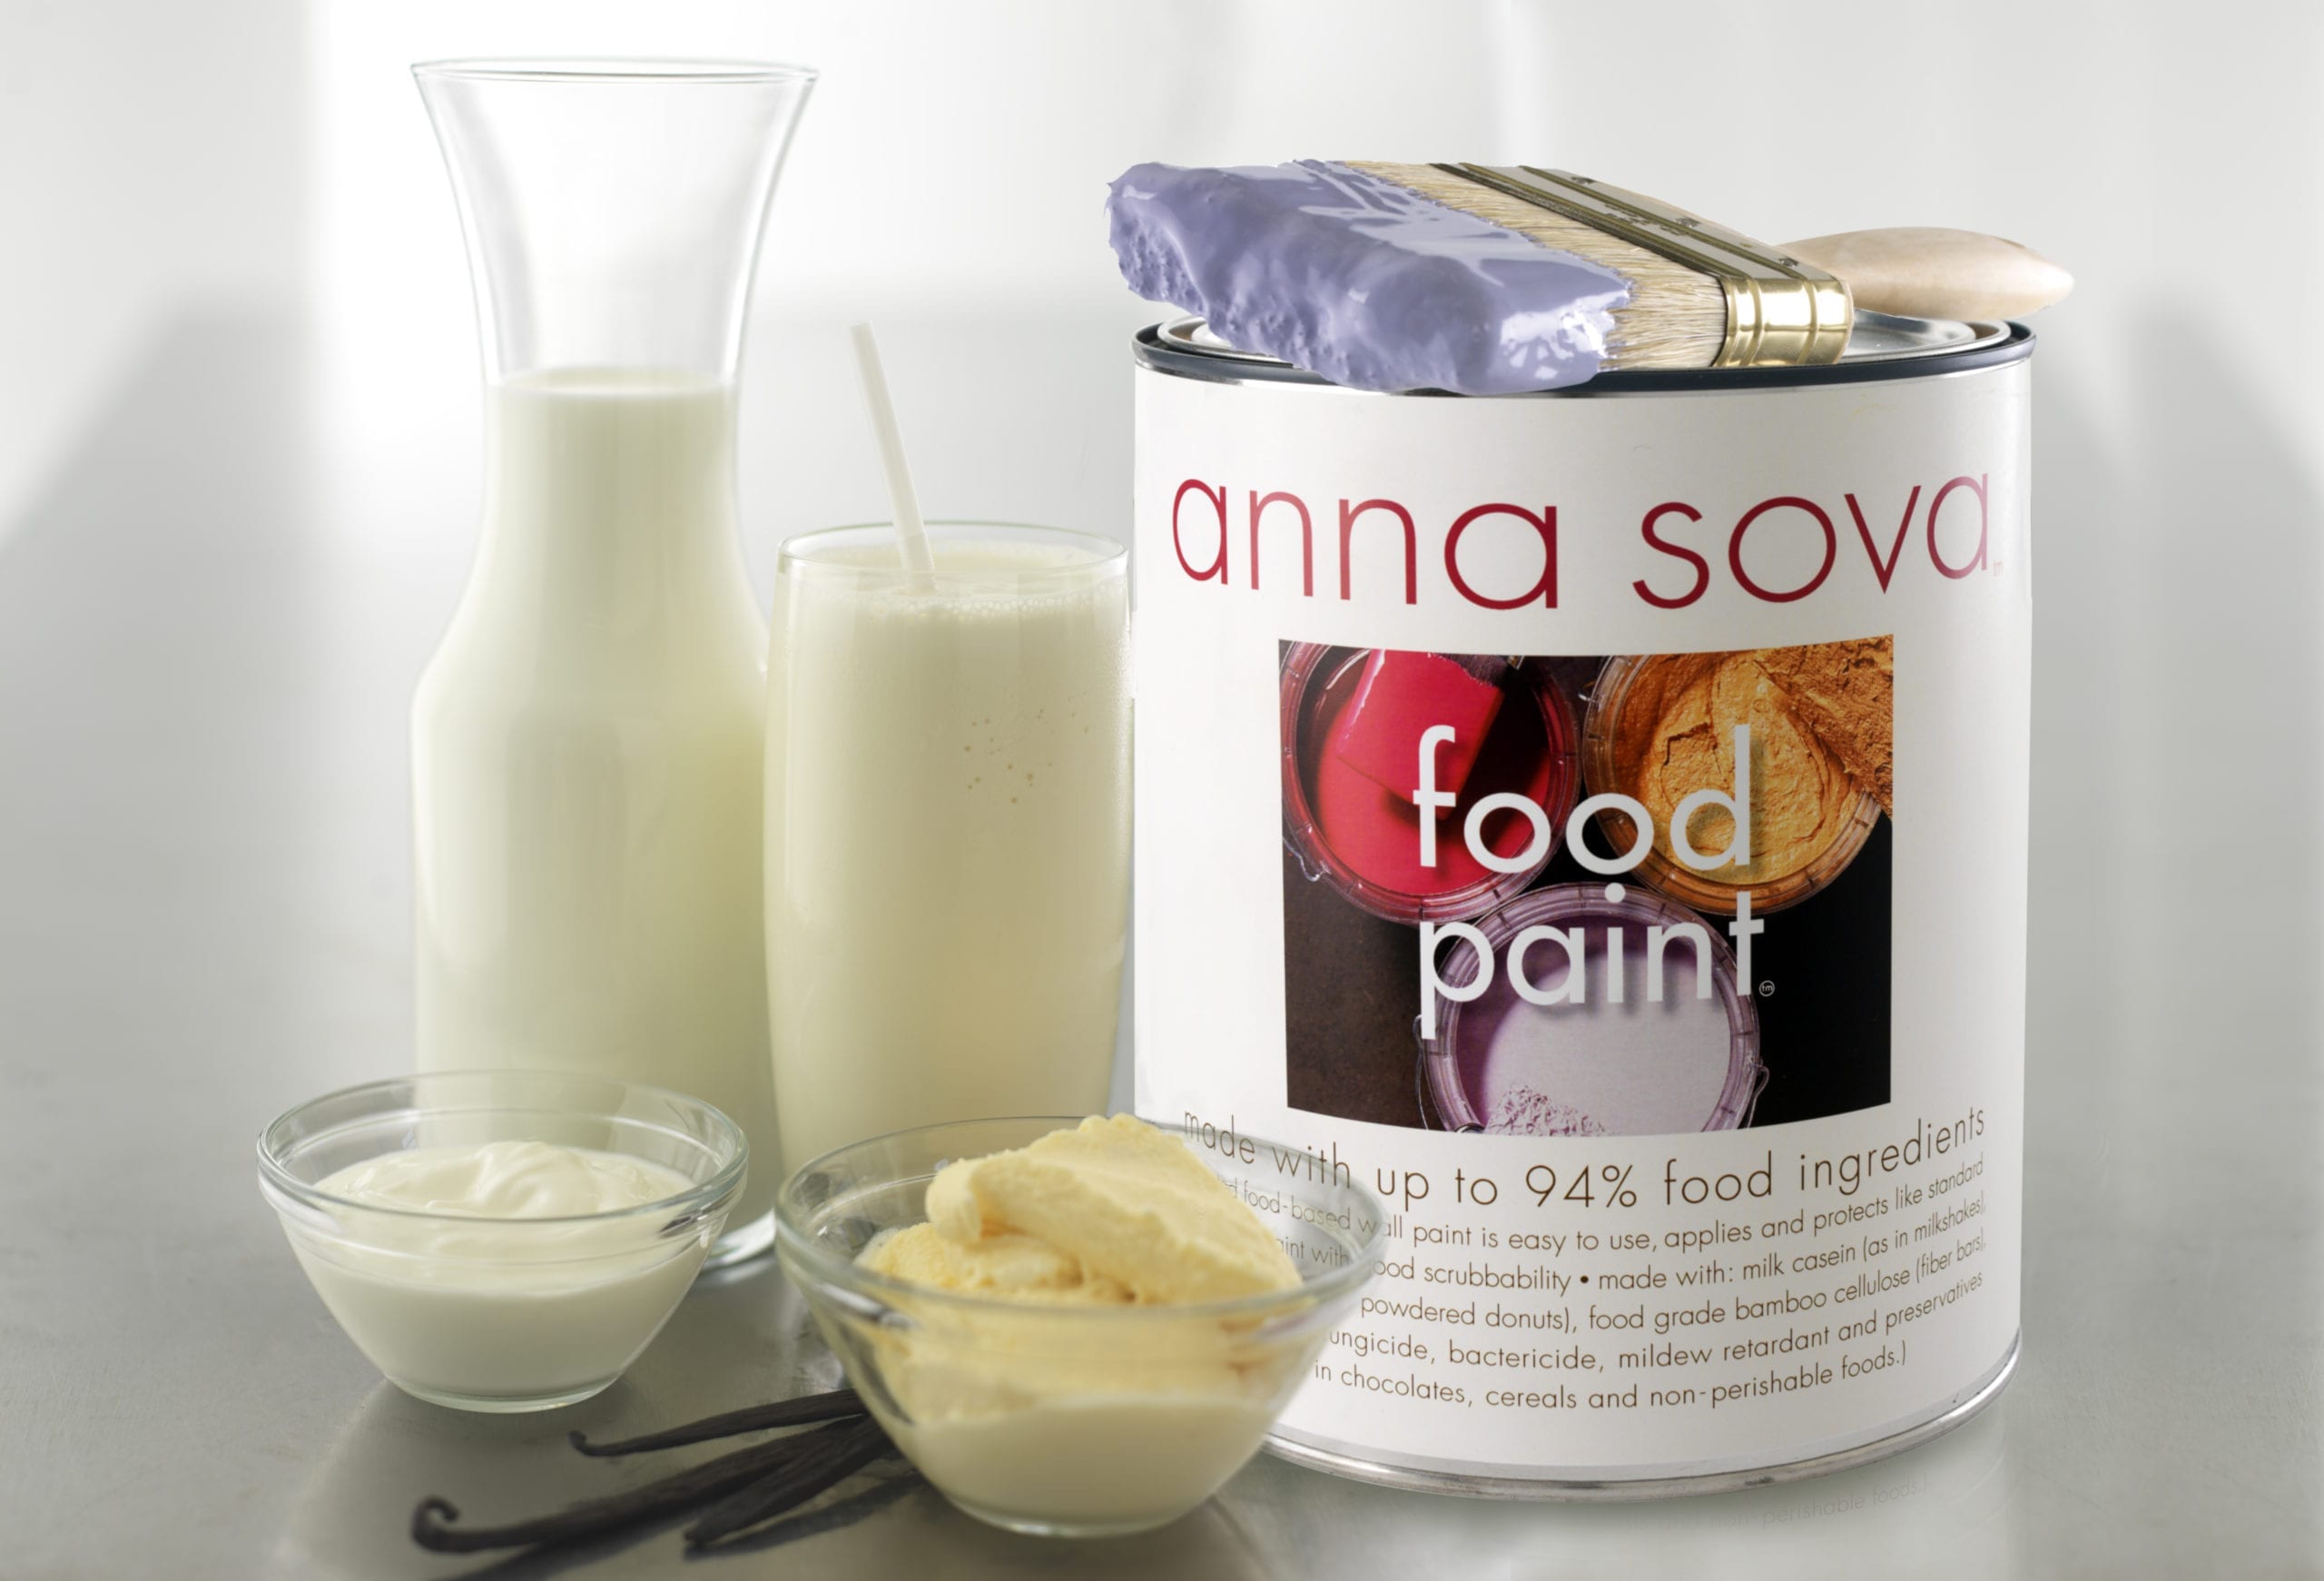 anna sova - food paint - can front photo